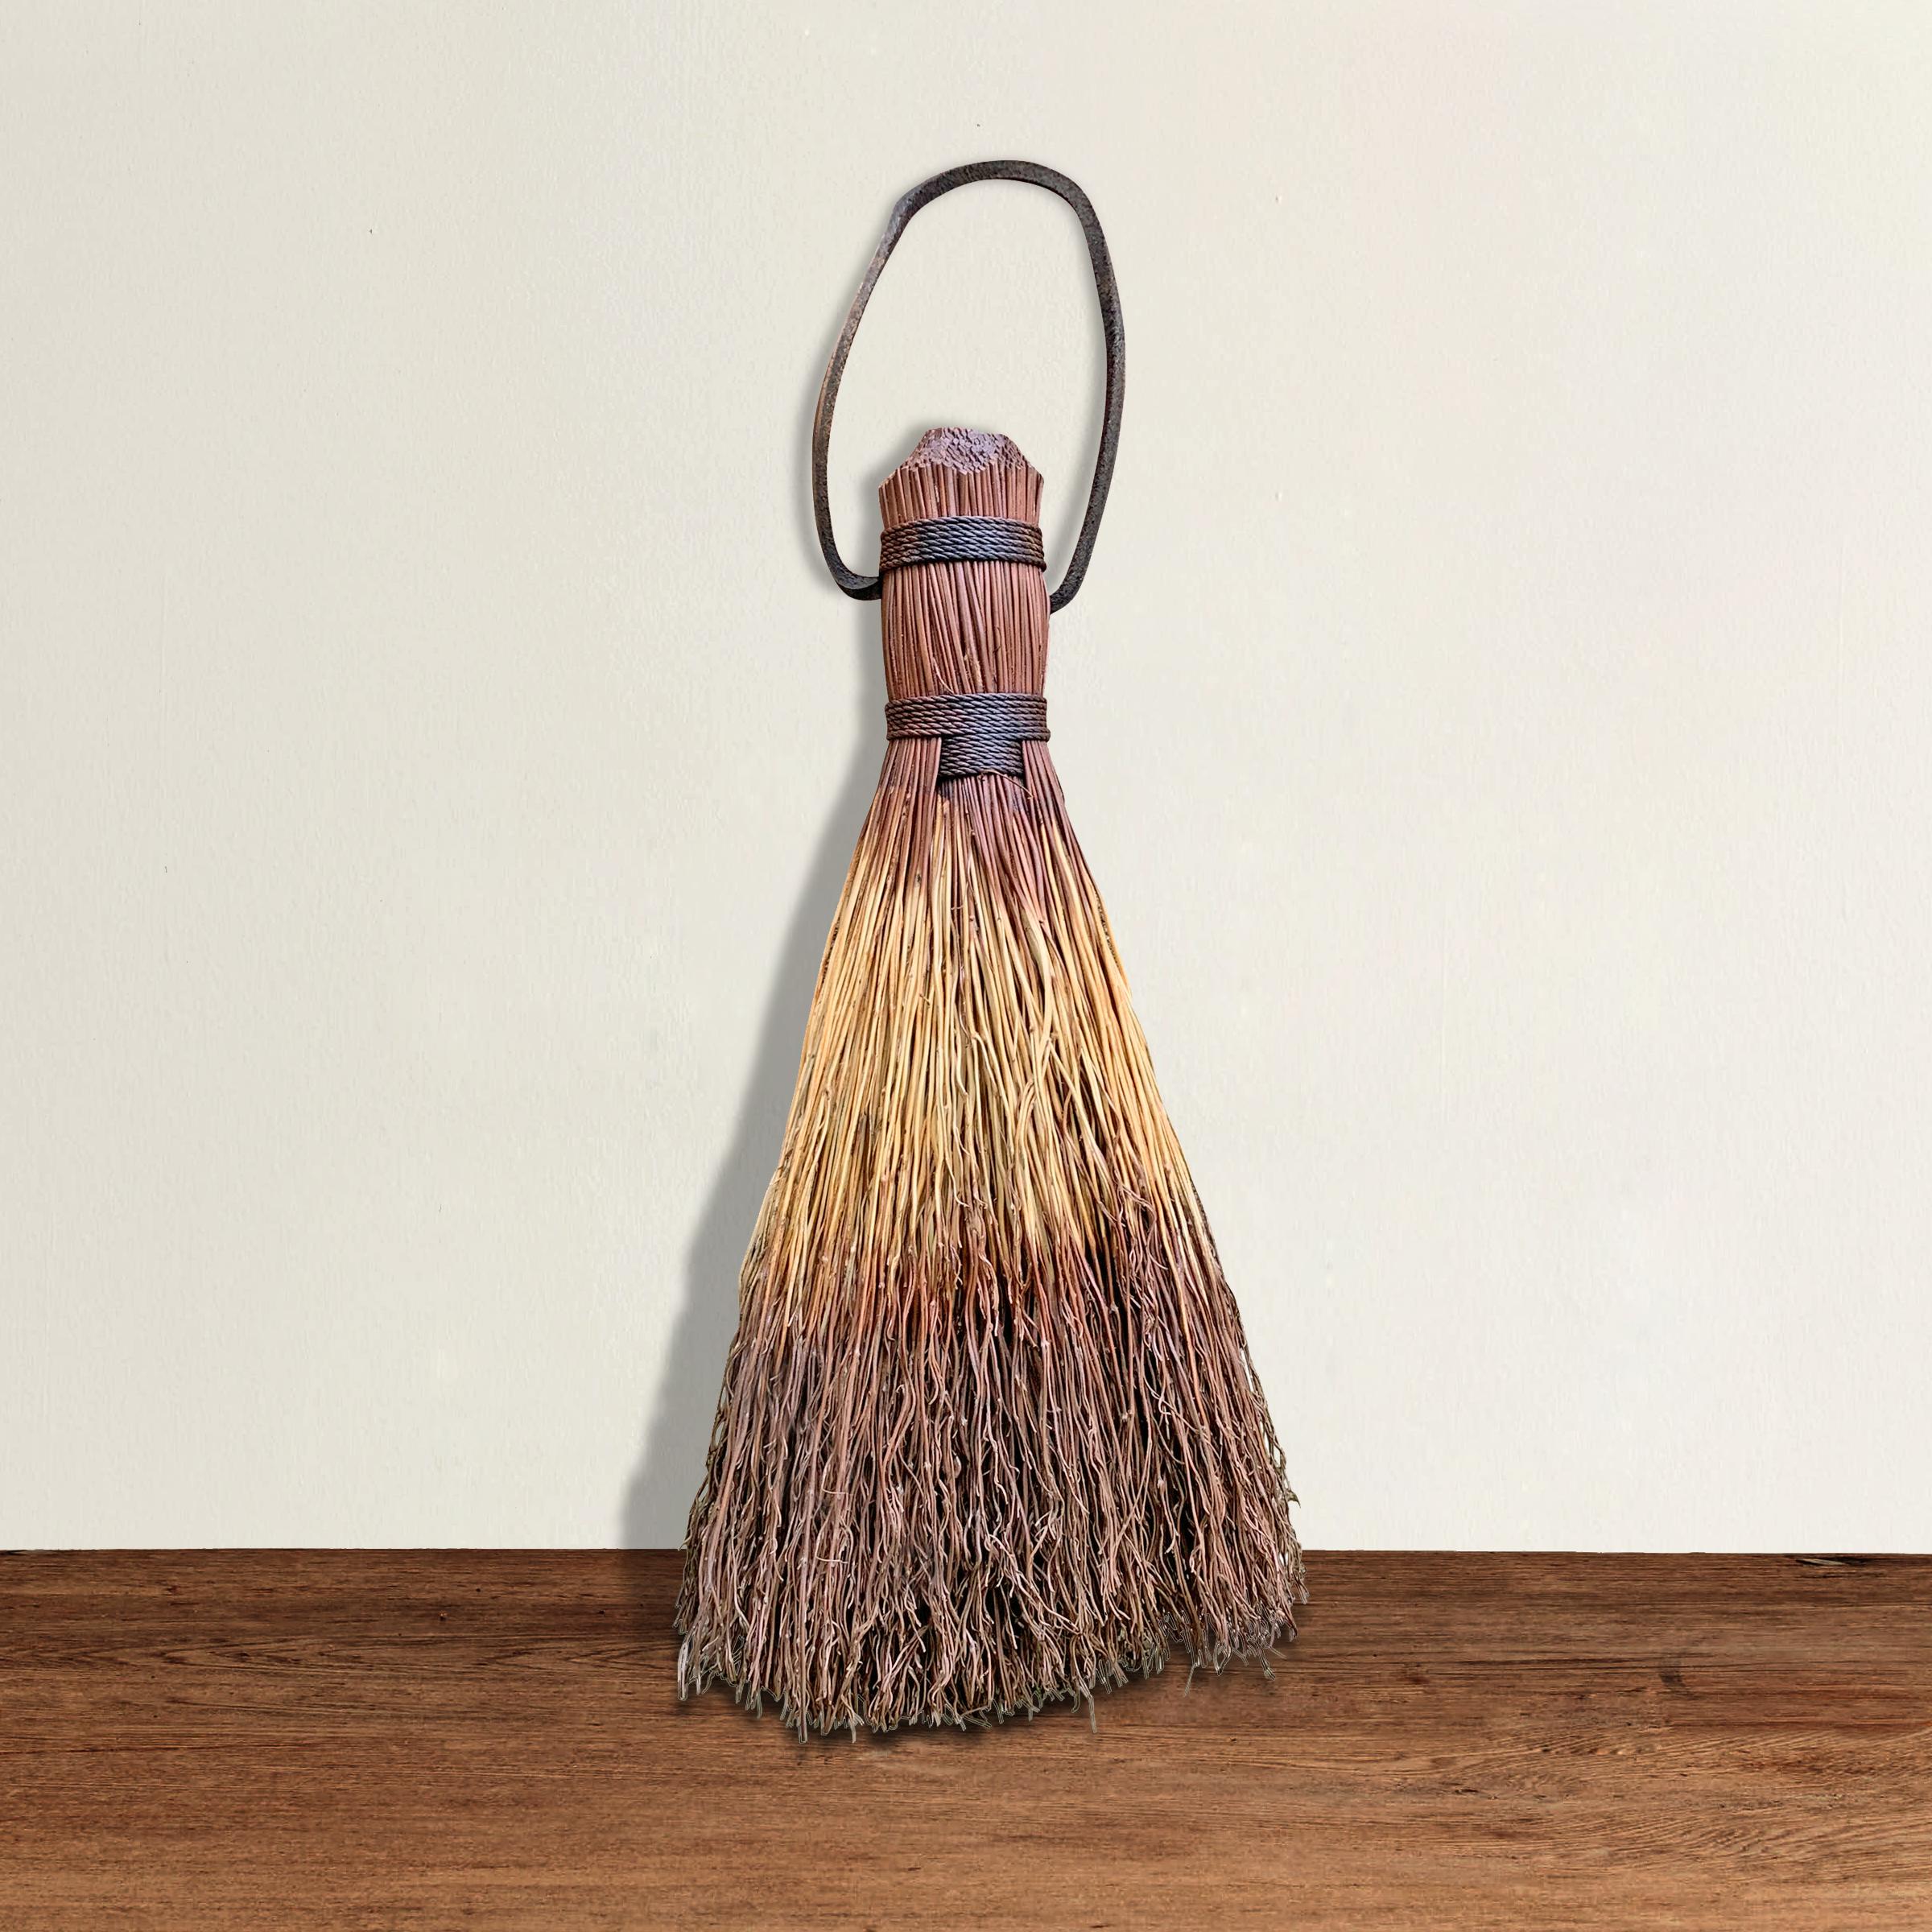 Handmade by artisans in rural Kentucky, our right proper cornbroom brush was crafted with shaker design principles in mind: “Don't make something unless it is both necessary and useful; and if it is both necessary and useful, then make it